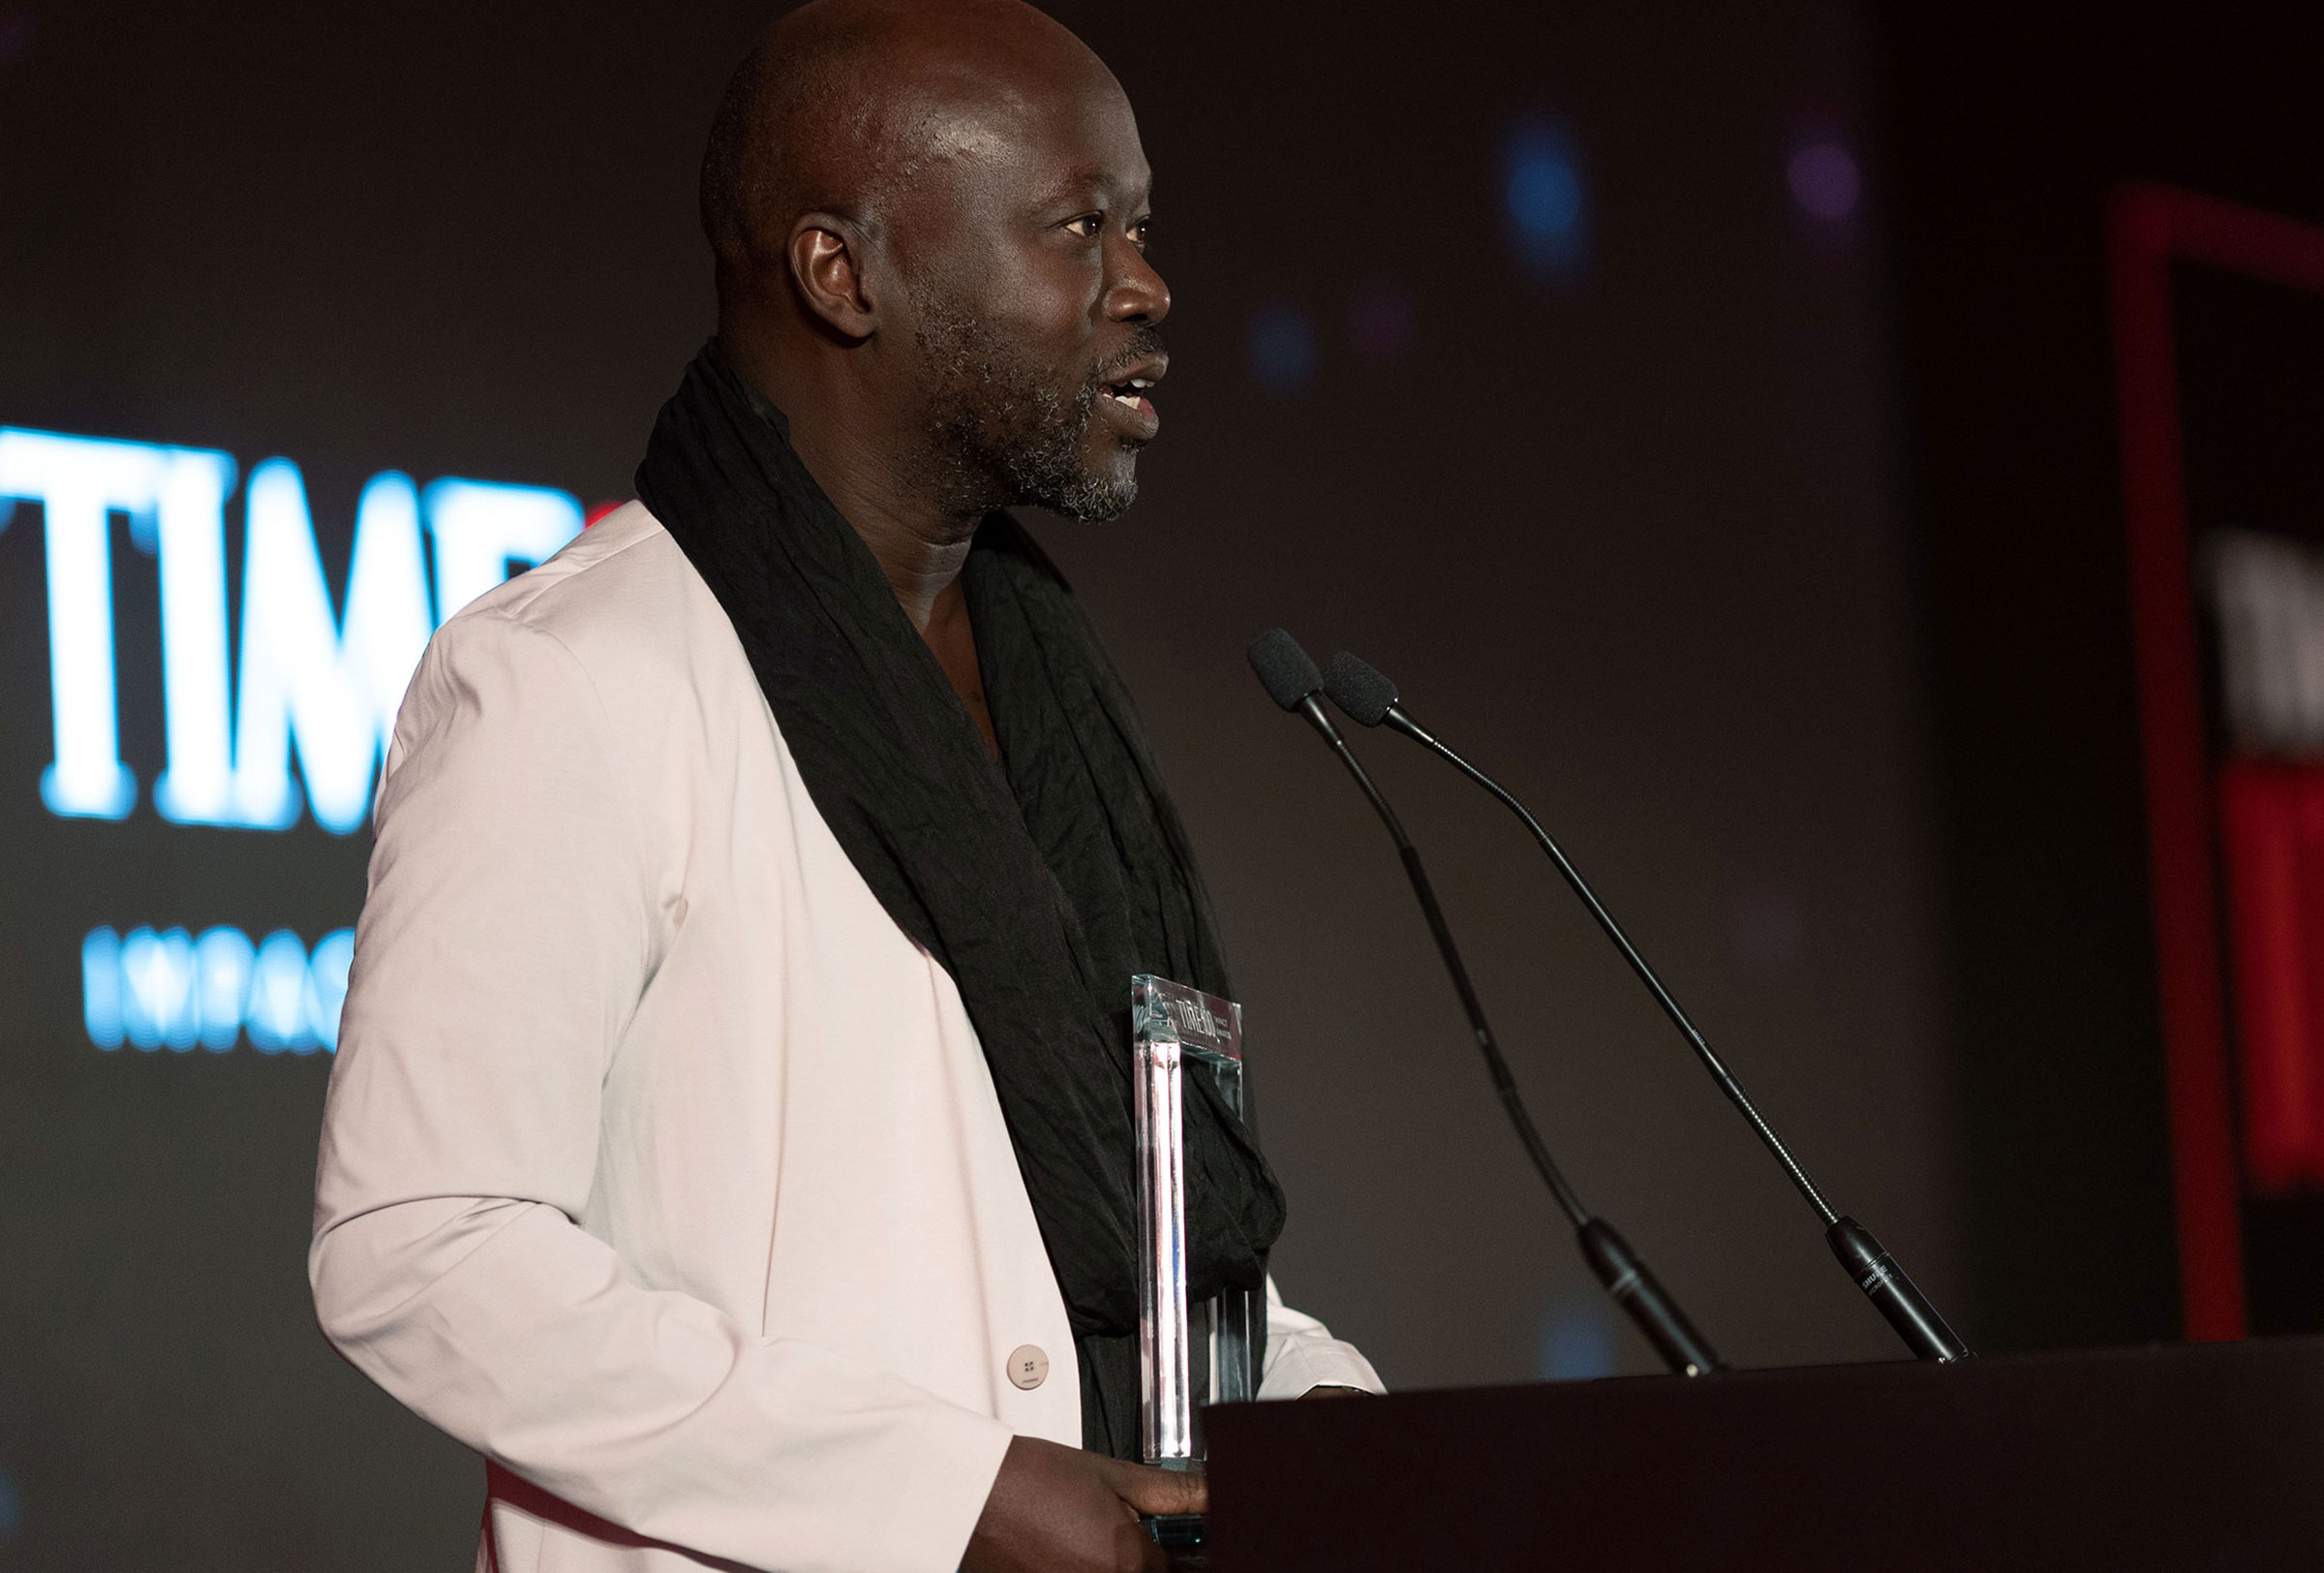 David Adjaye accepts the TIME 100 Impact Award at the Museum of the Future in Dubai on March 28, 2022. (Pause Films / Igor Moskalenko)